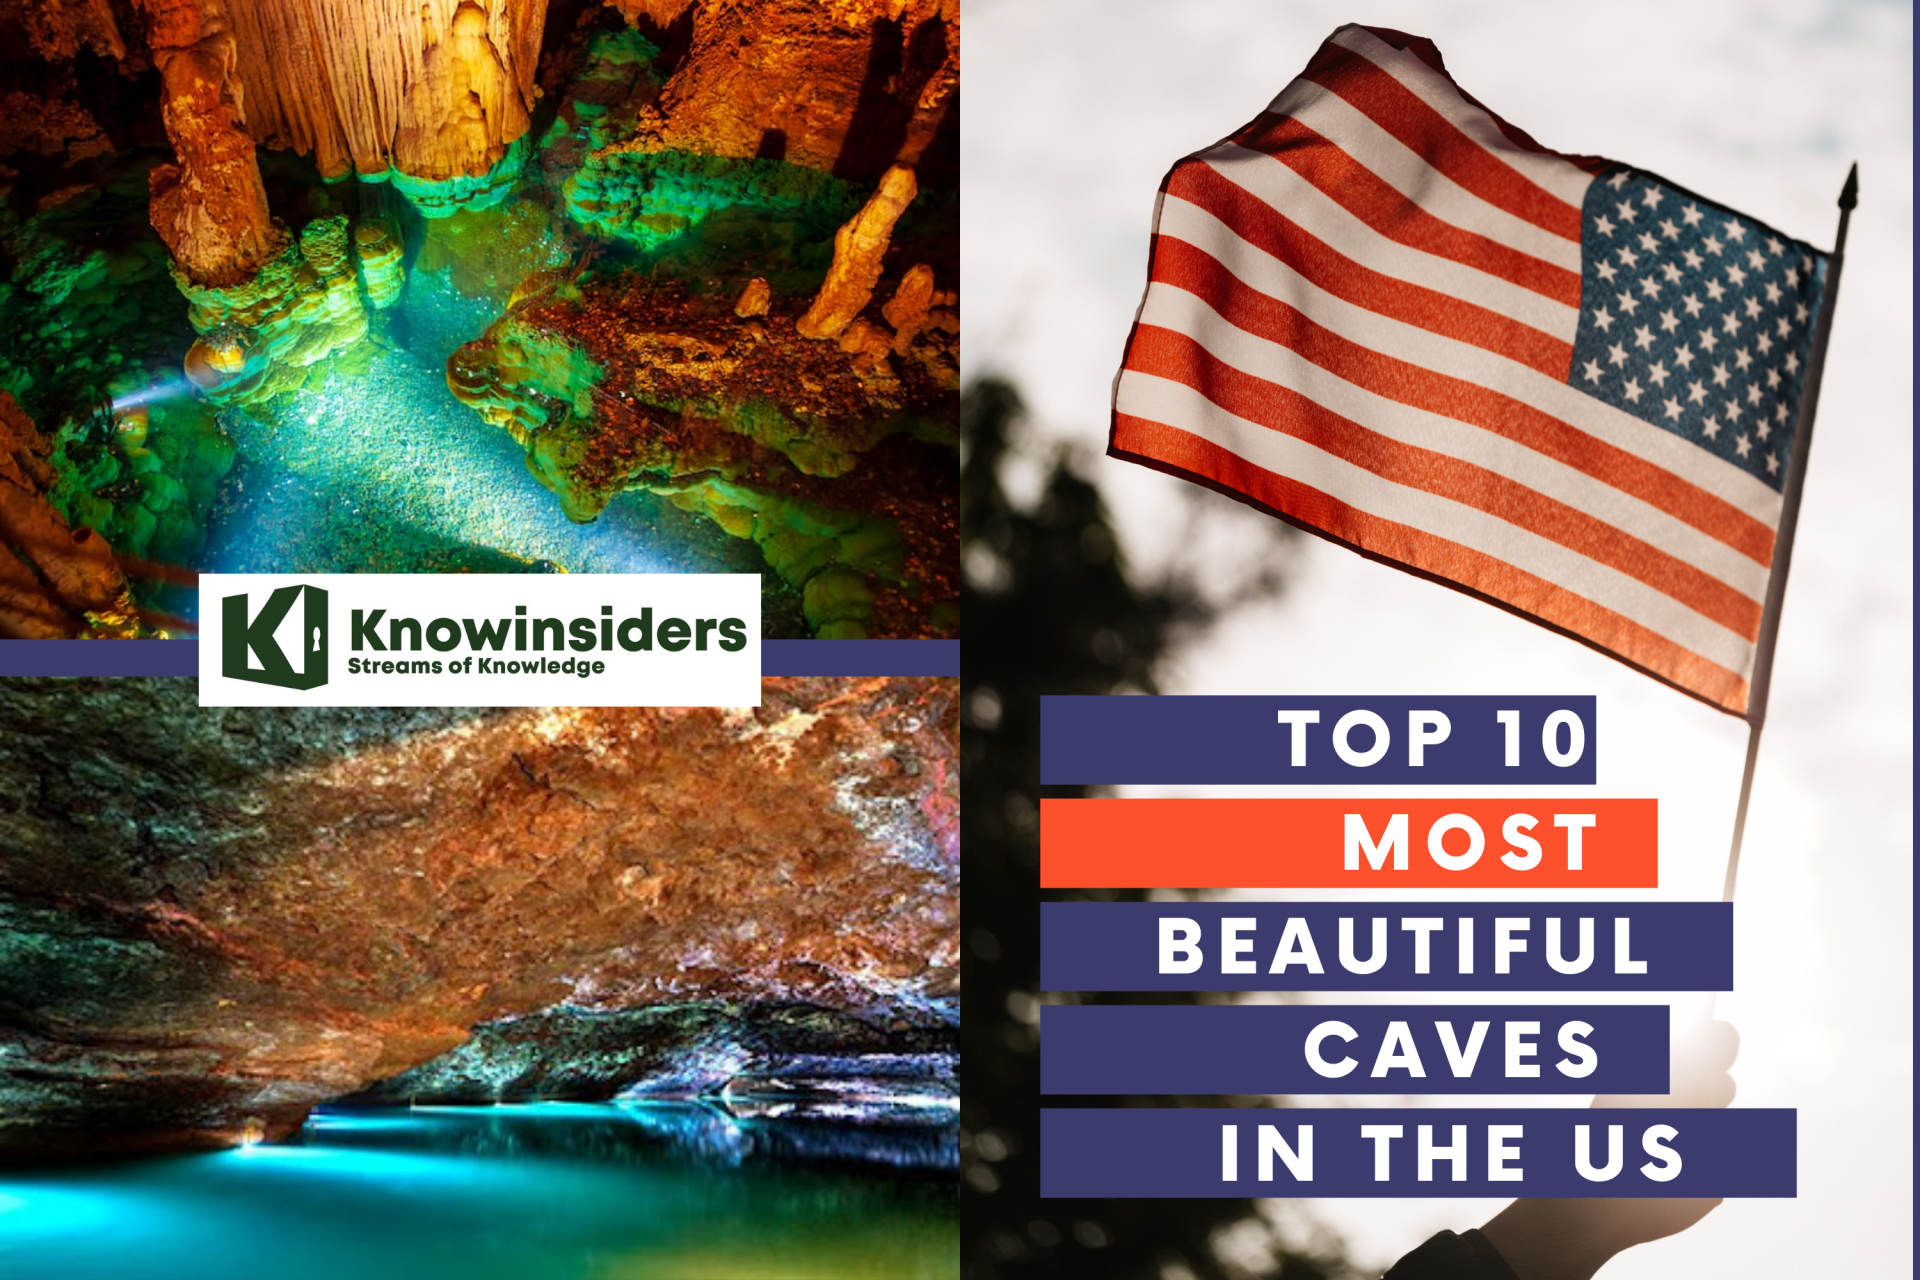 Top 10 Most Beautiful Caves in the US